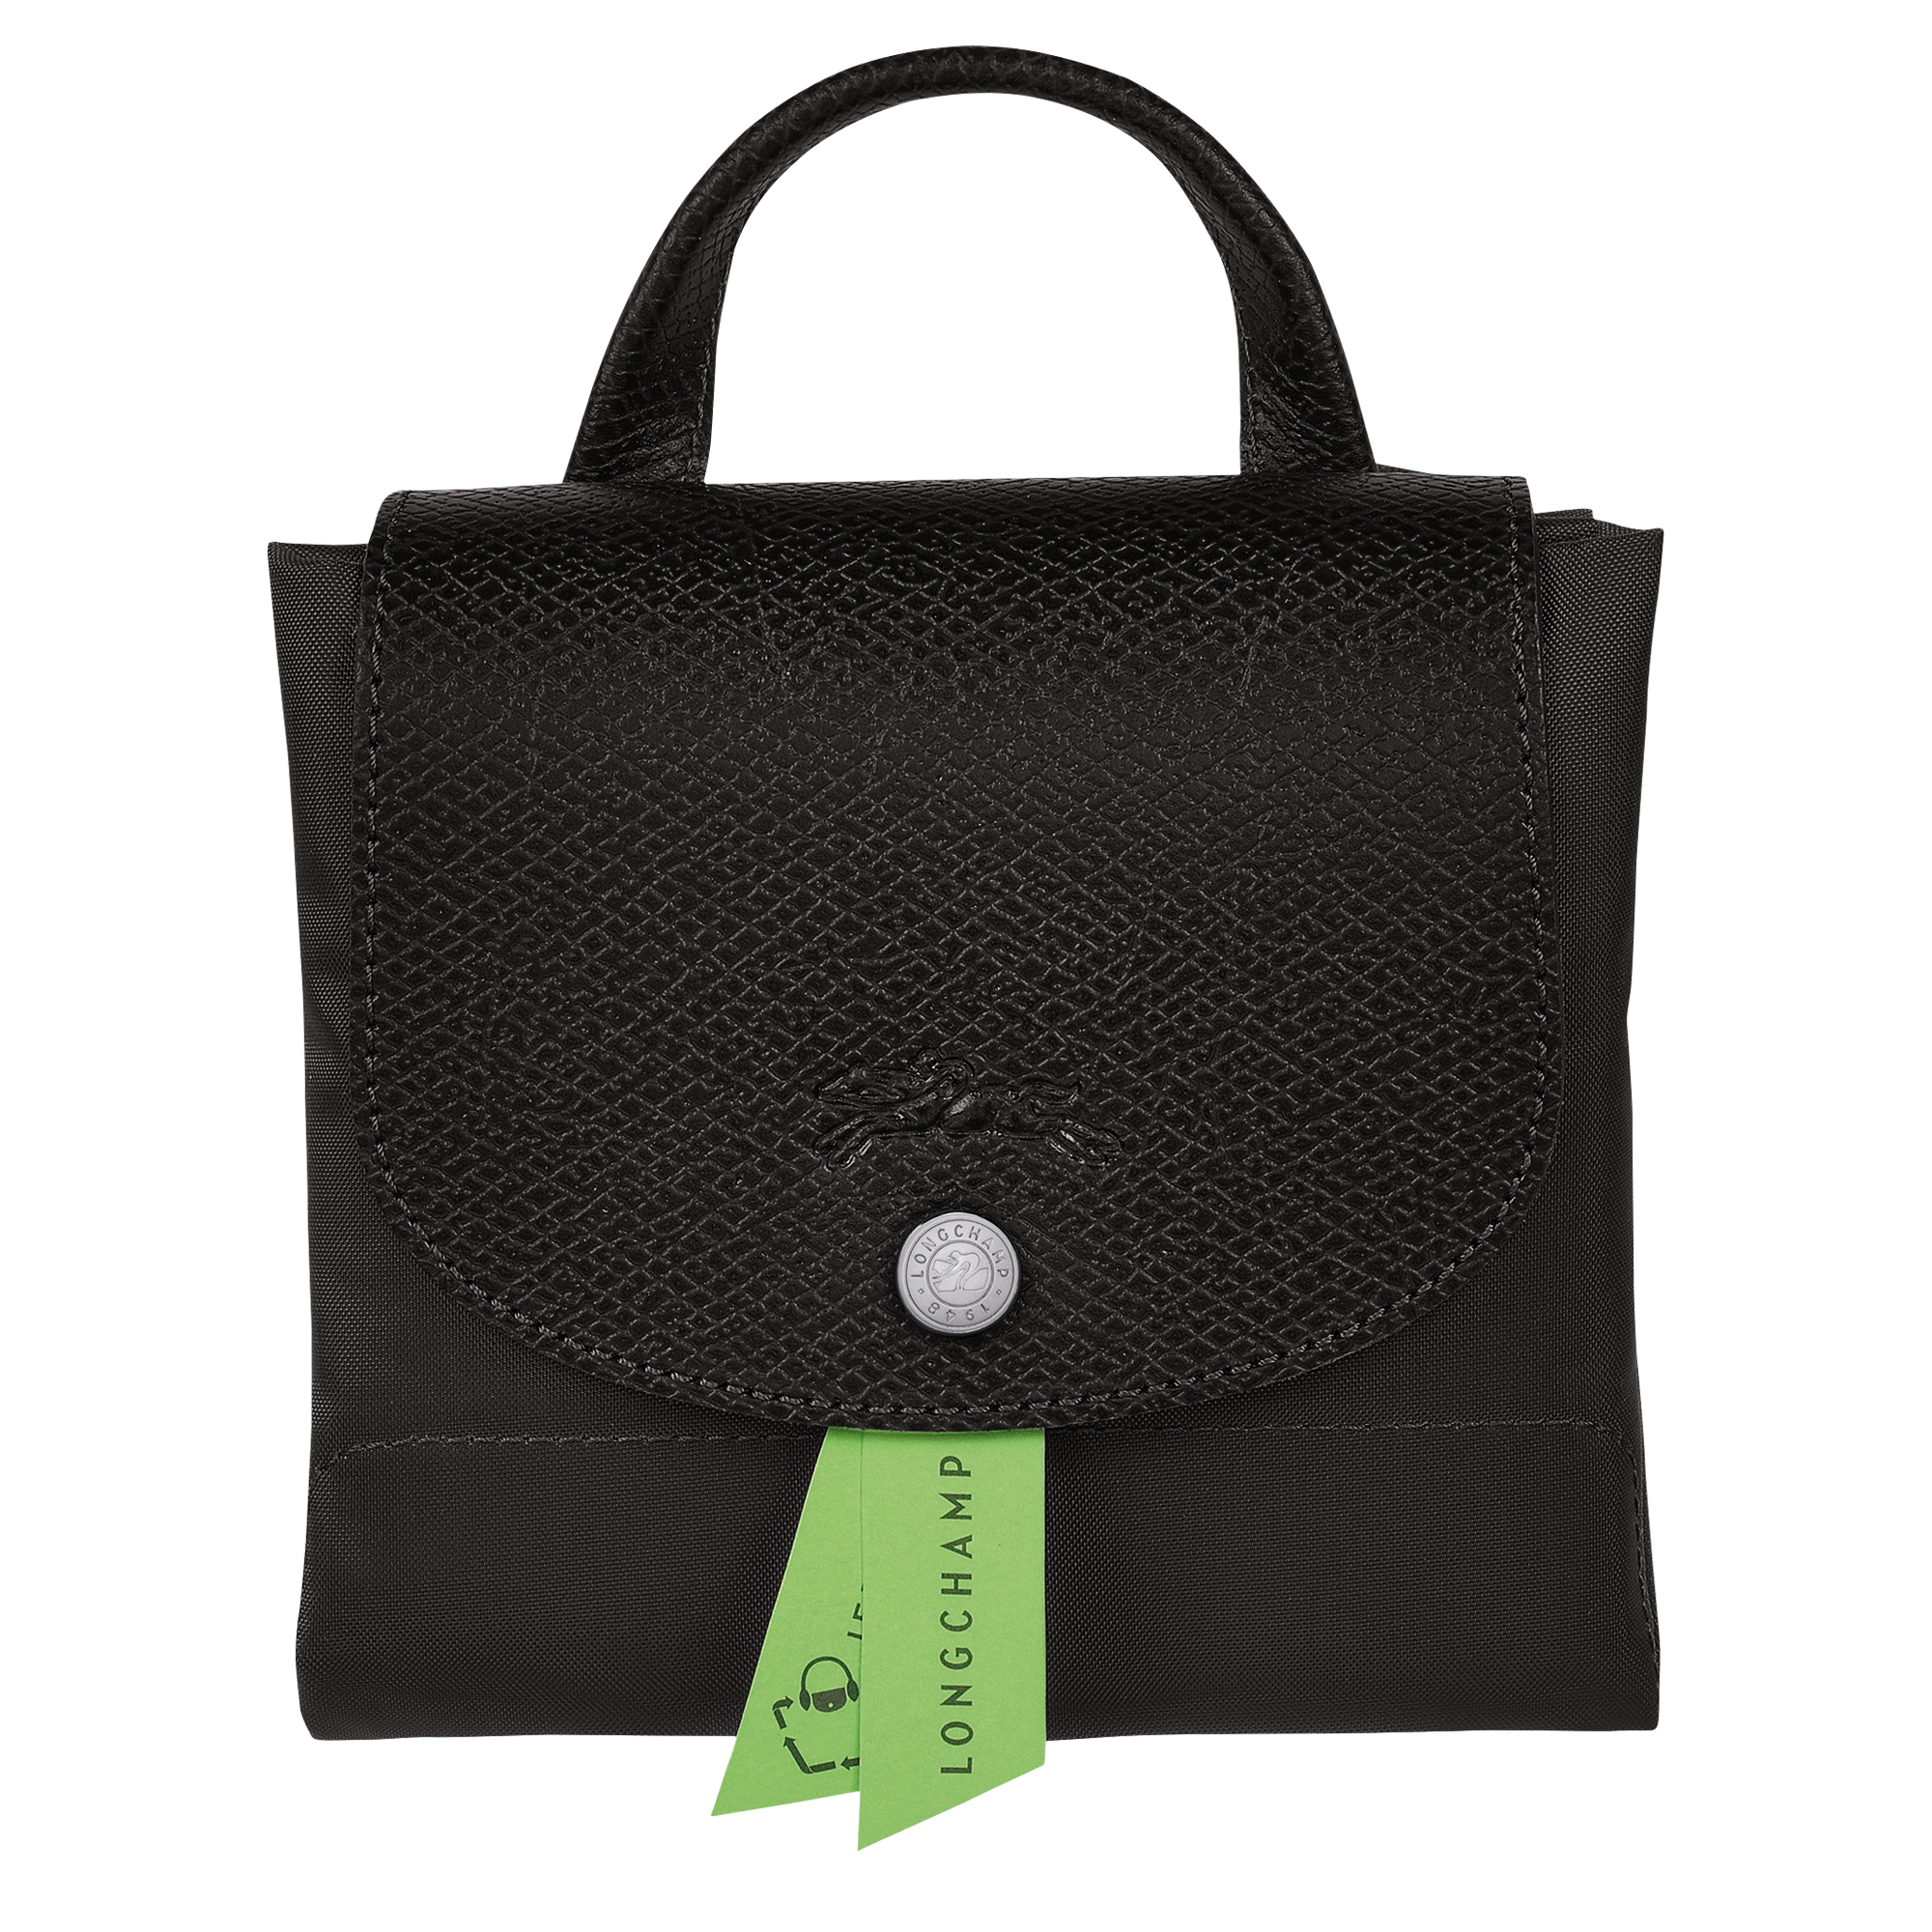 Le Pliage Green M Travel bag Black - Recycled canvas (L1625919001)